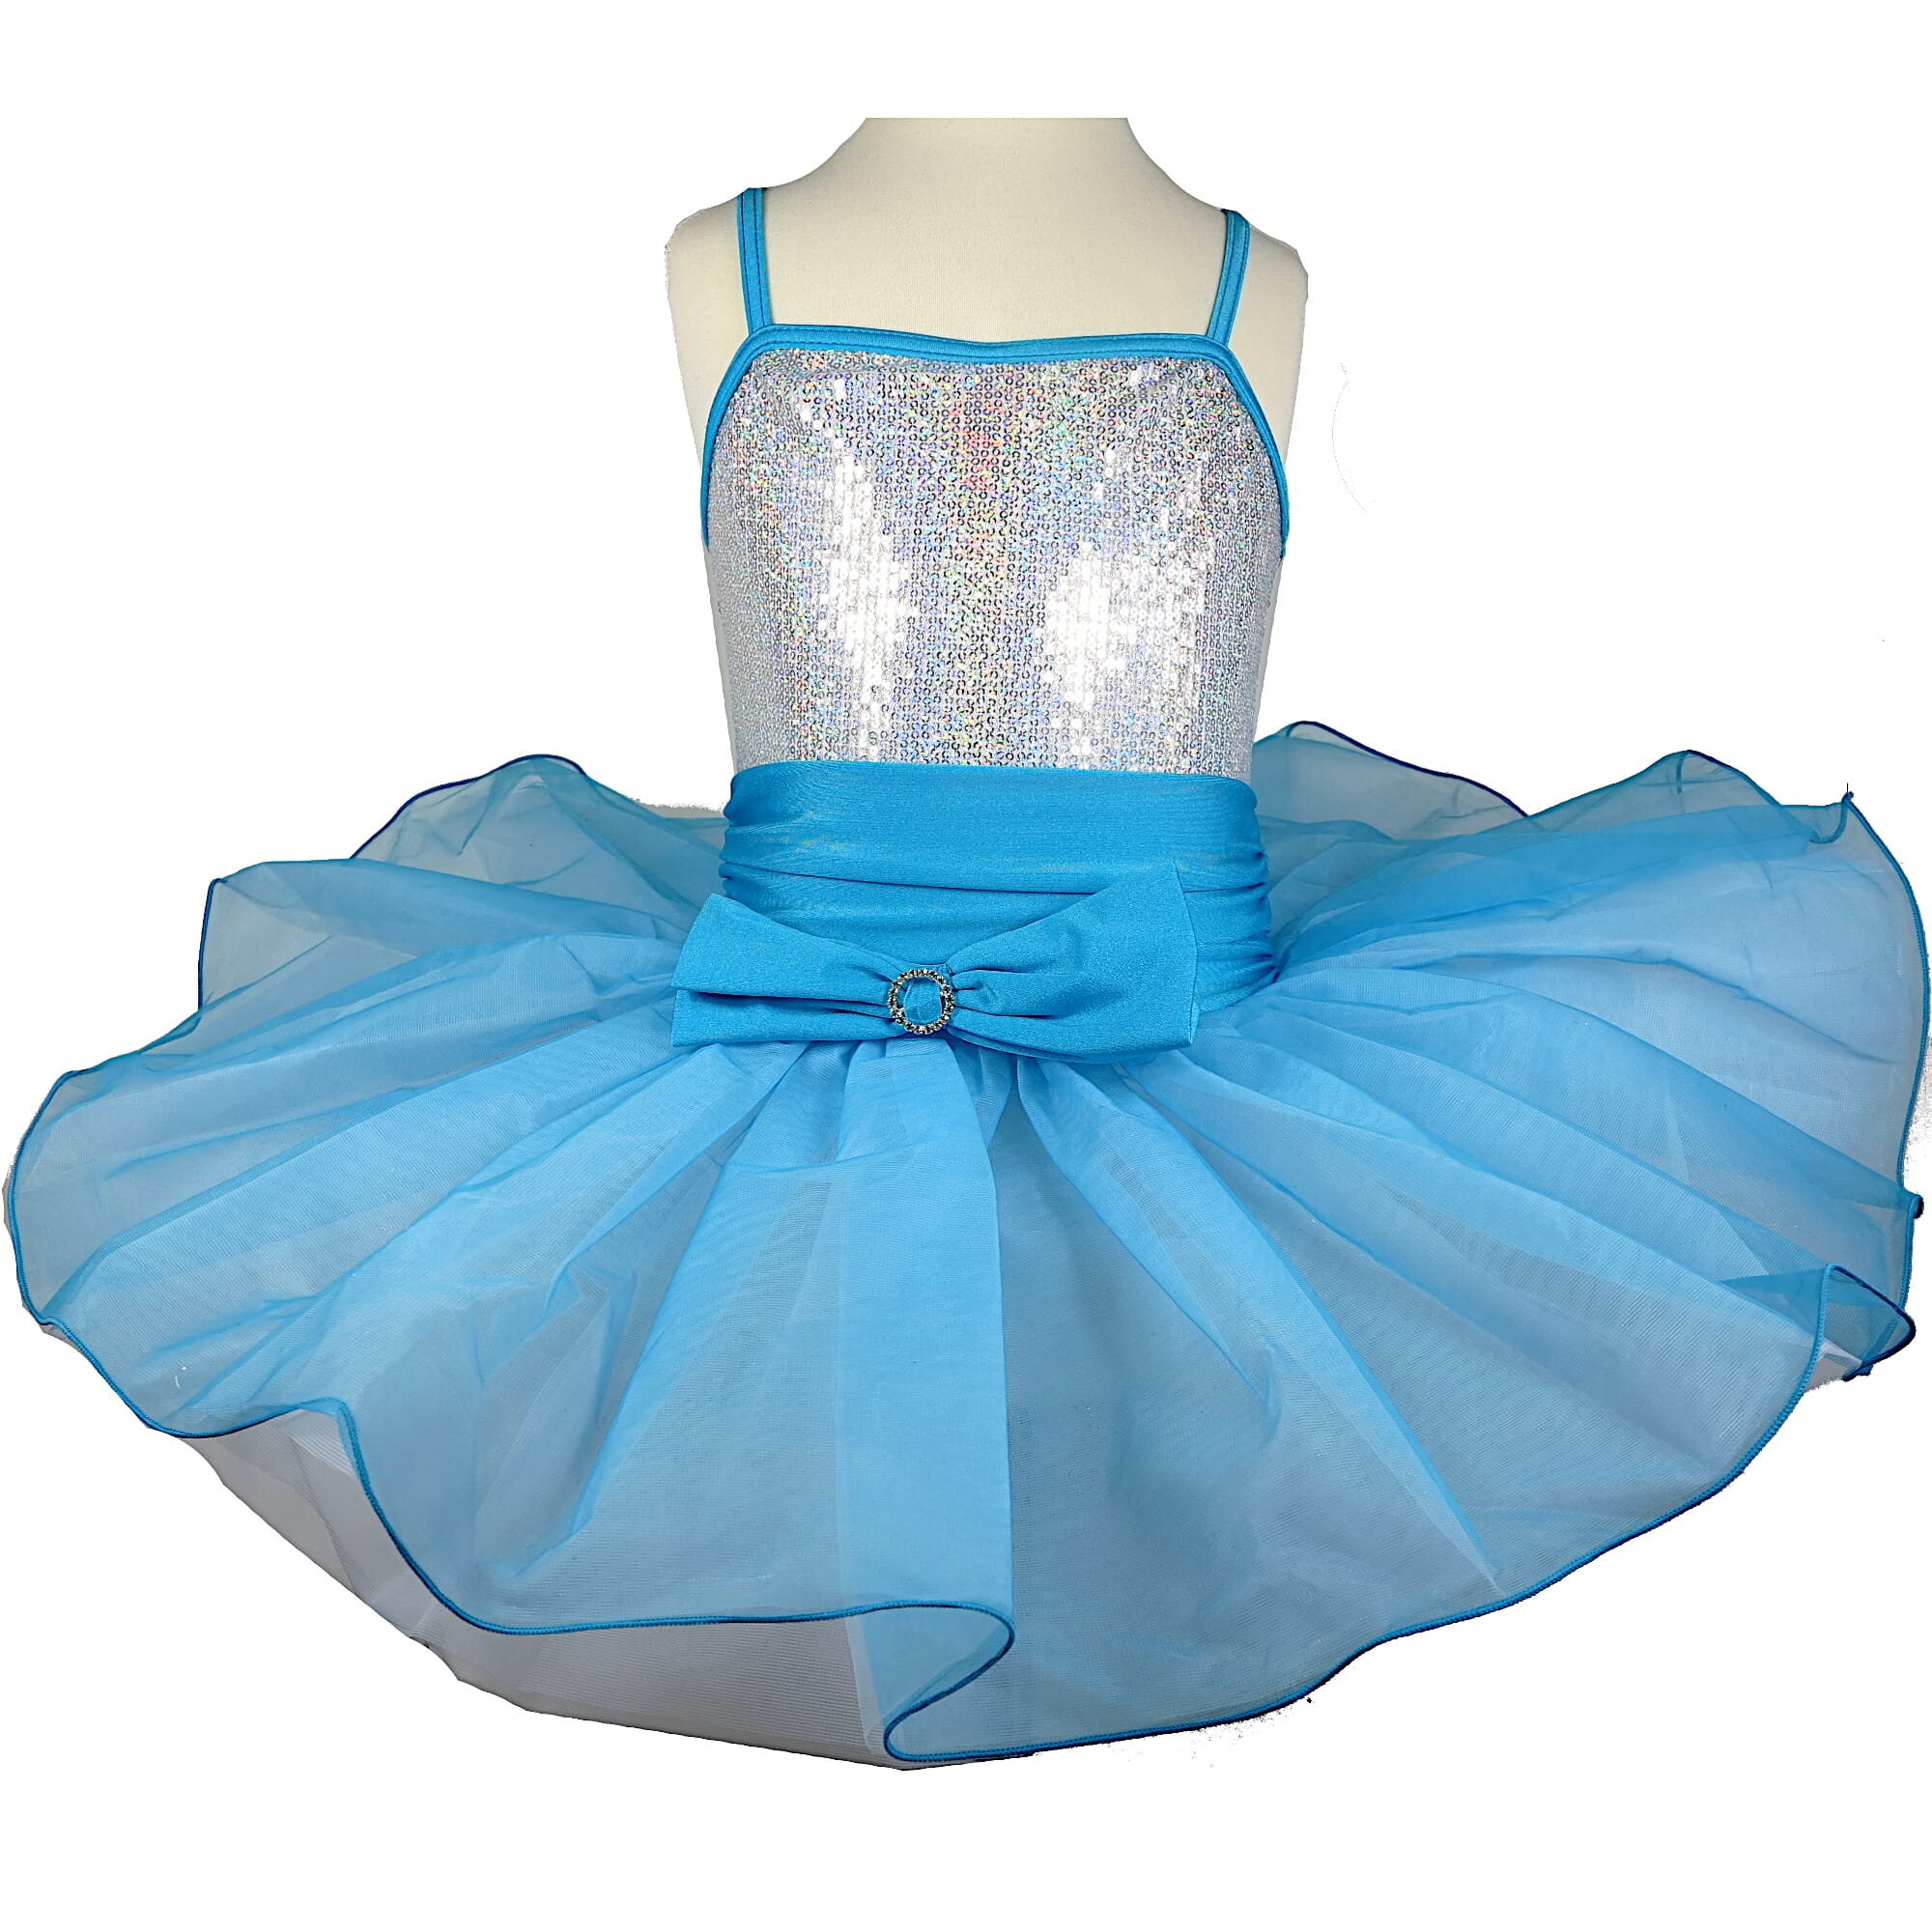 Hire Elsa Tutu from Costume Source | Ballet costume for hire